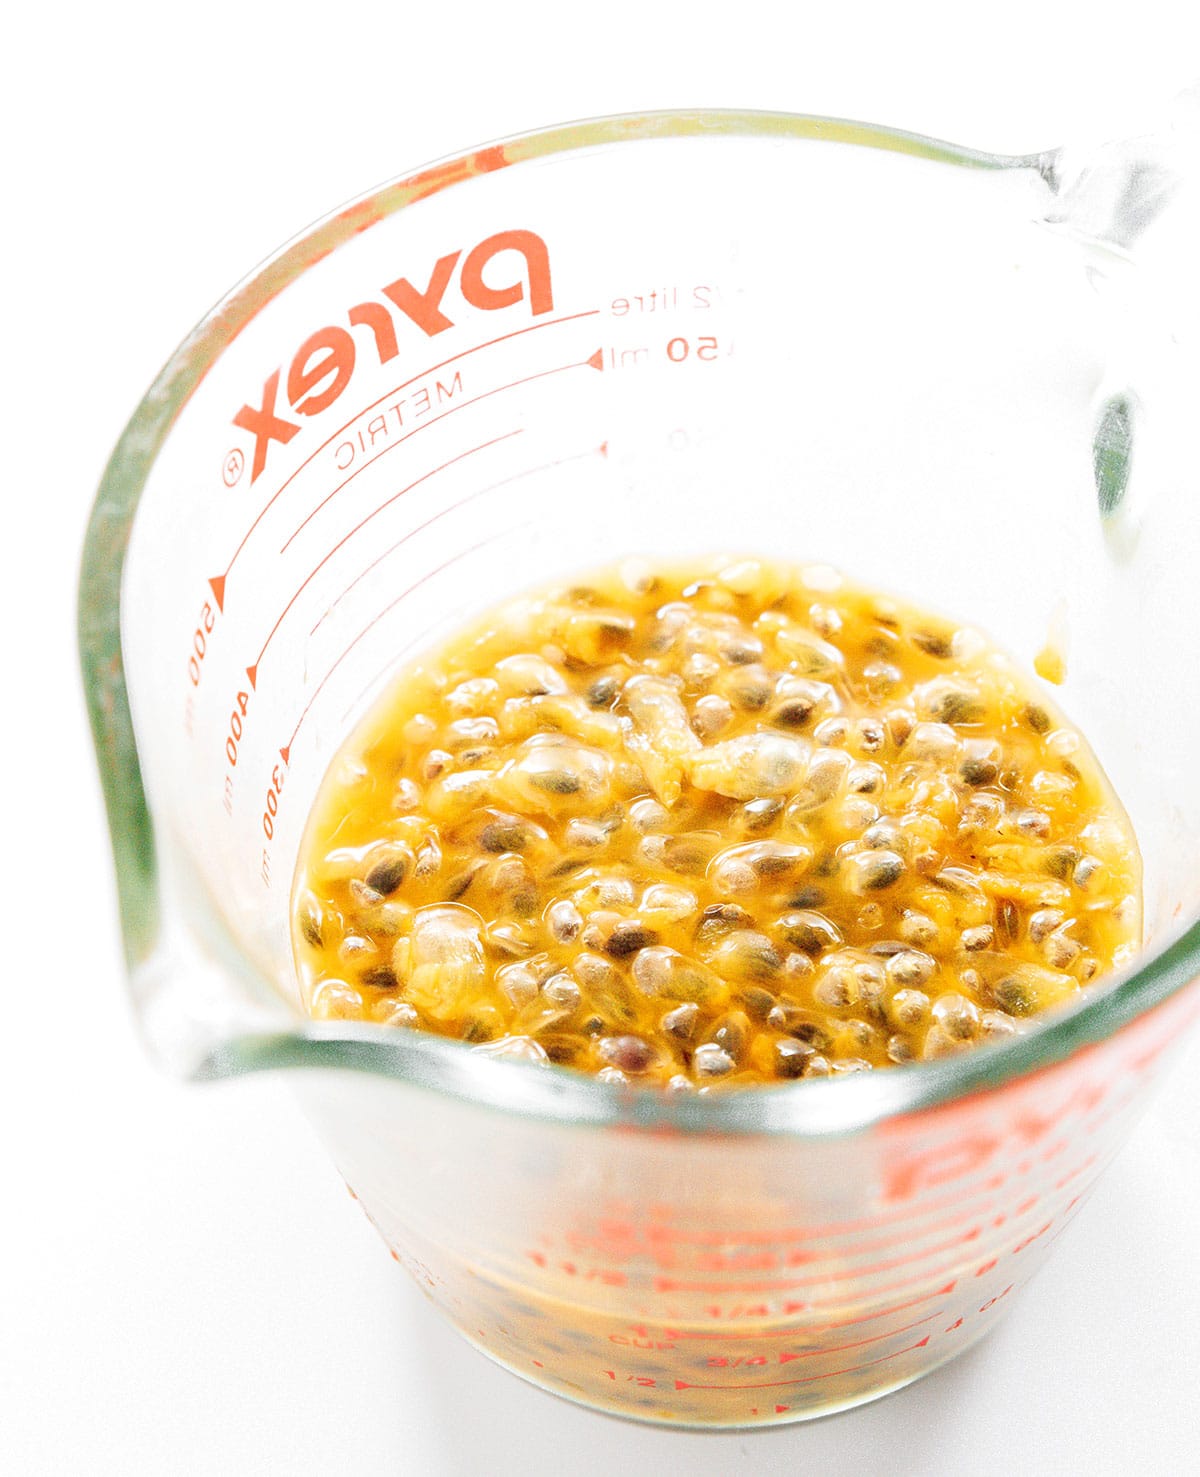 Passion fruit pulp in a glass measuring cup.